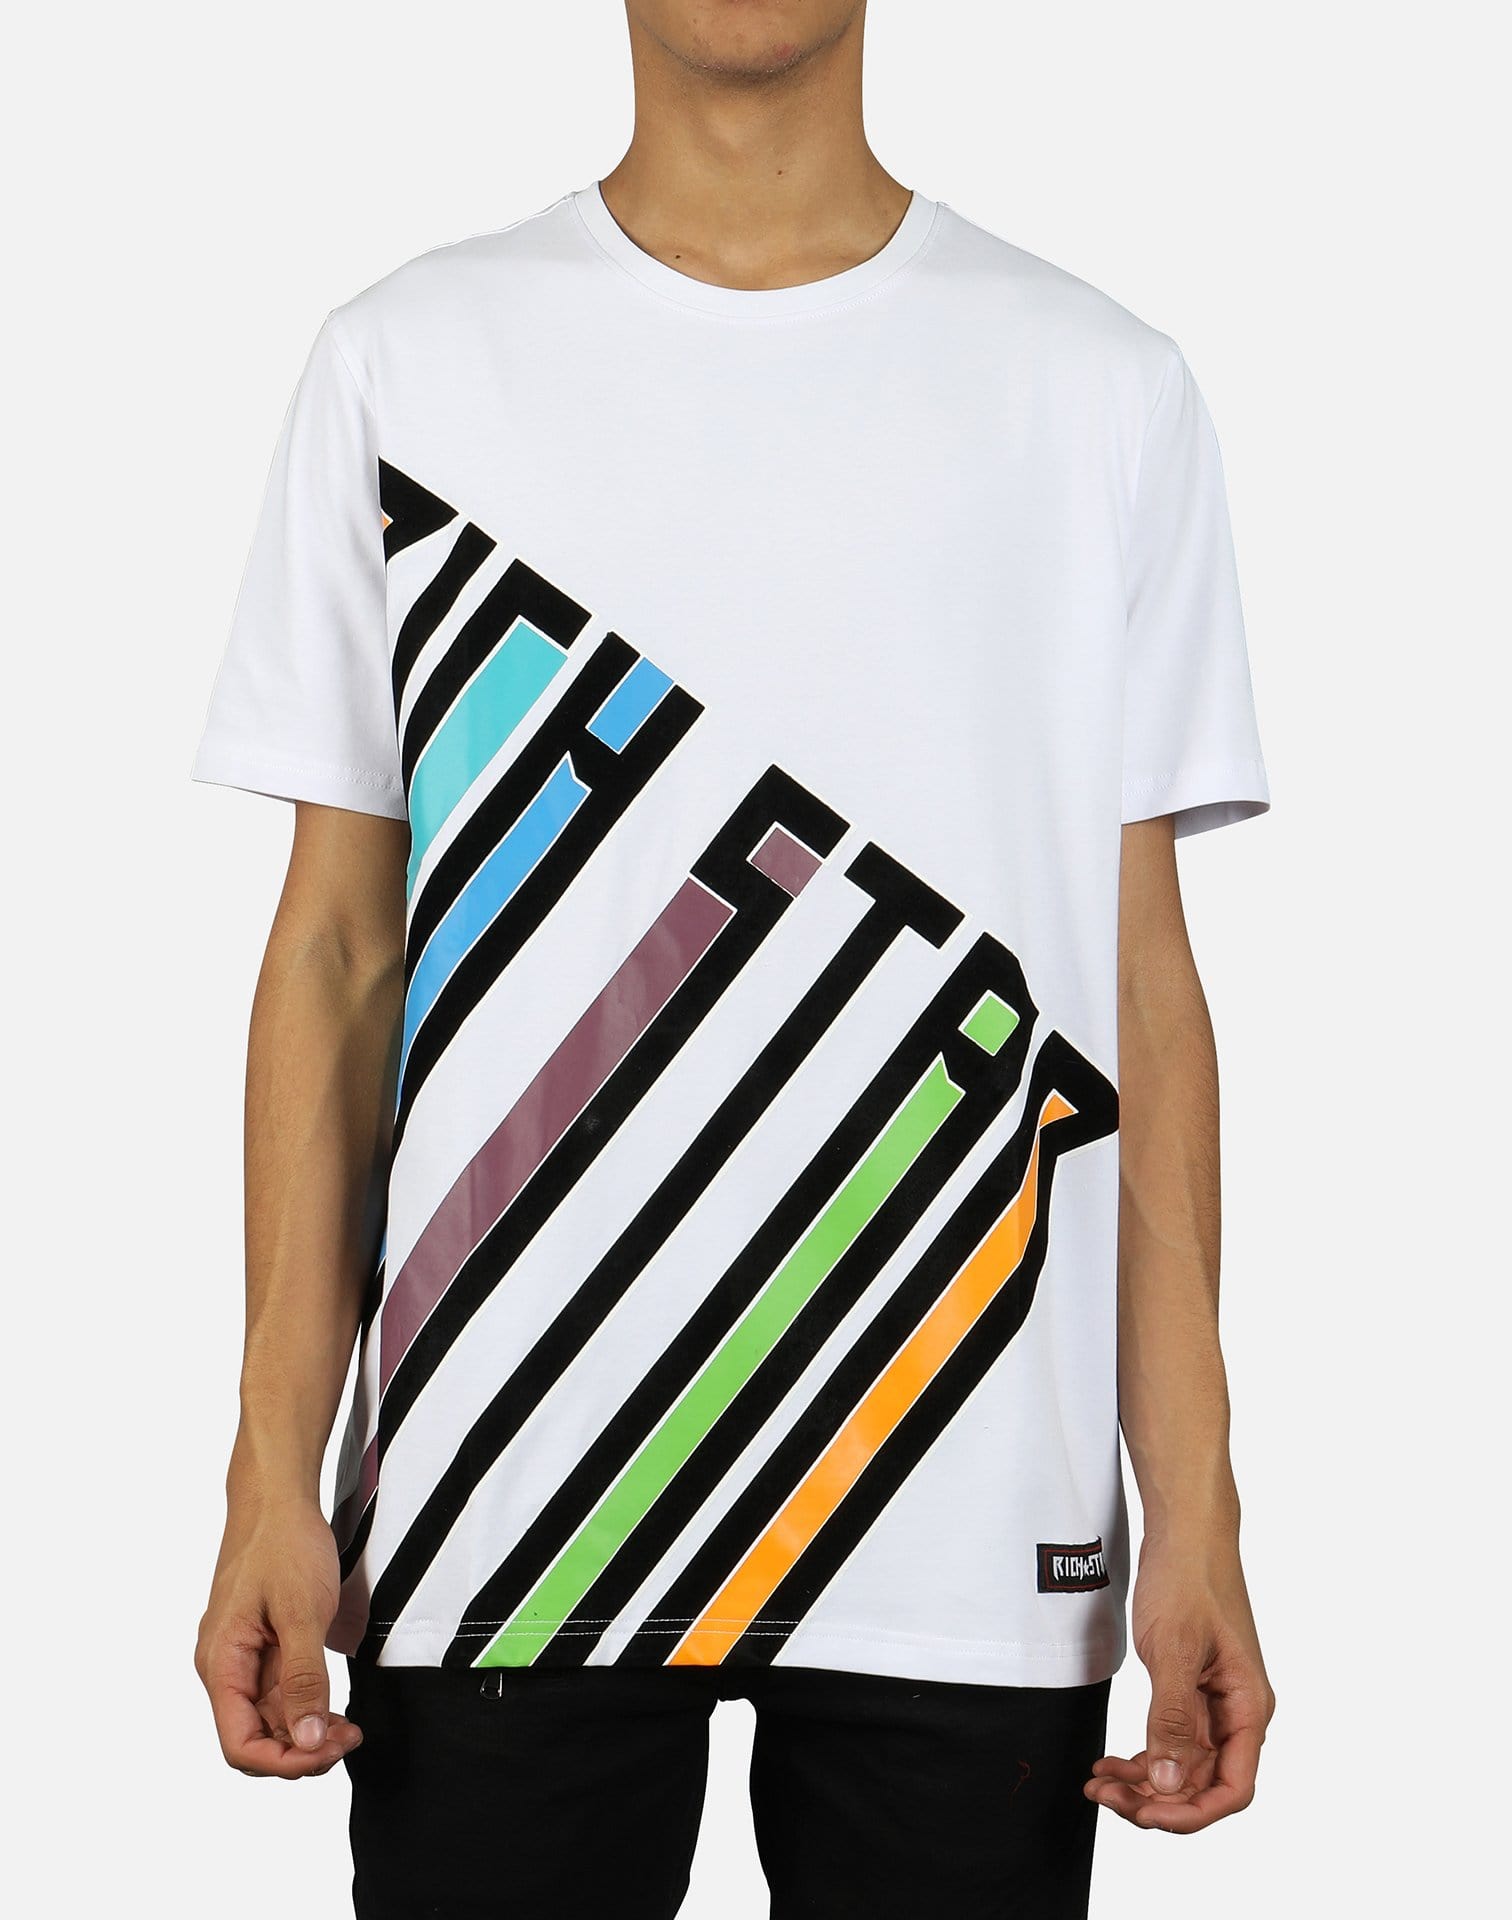 Rich Star Men's Colorful 'Rich Star' Tee